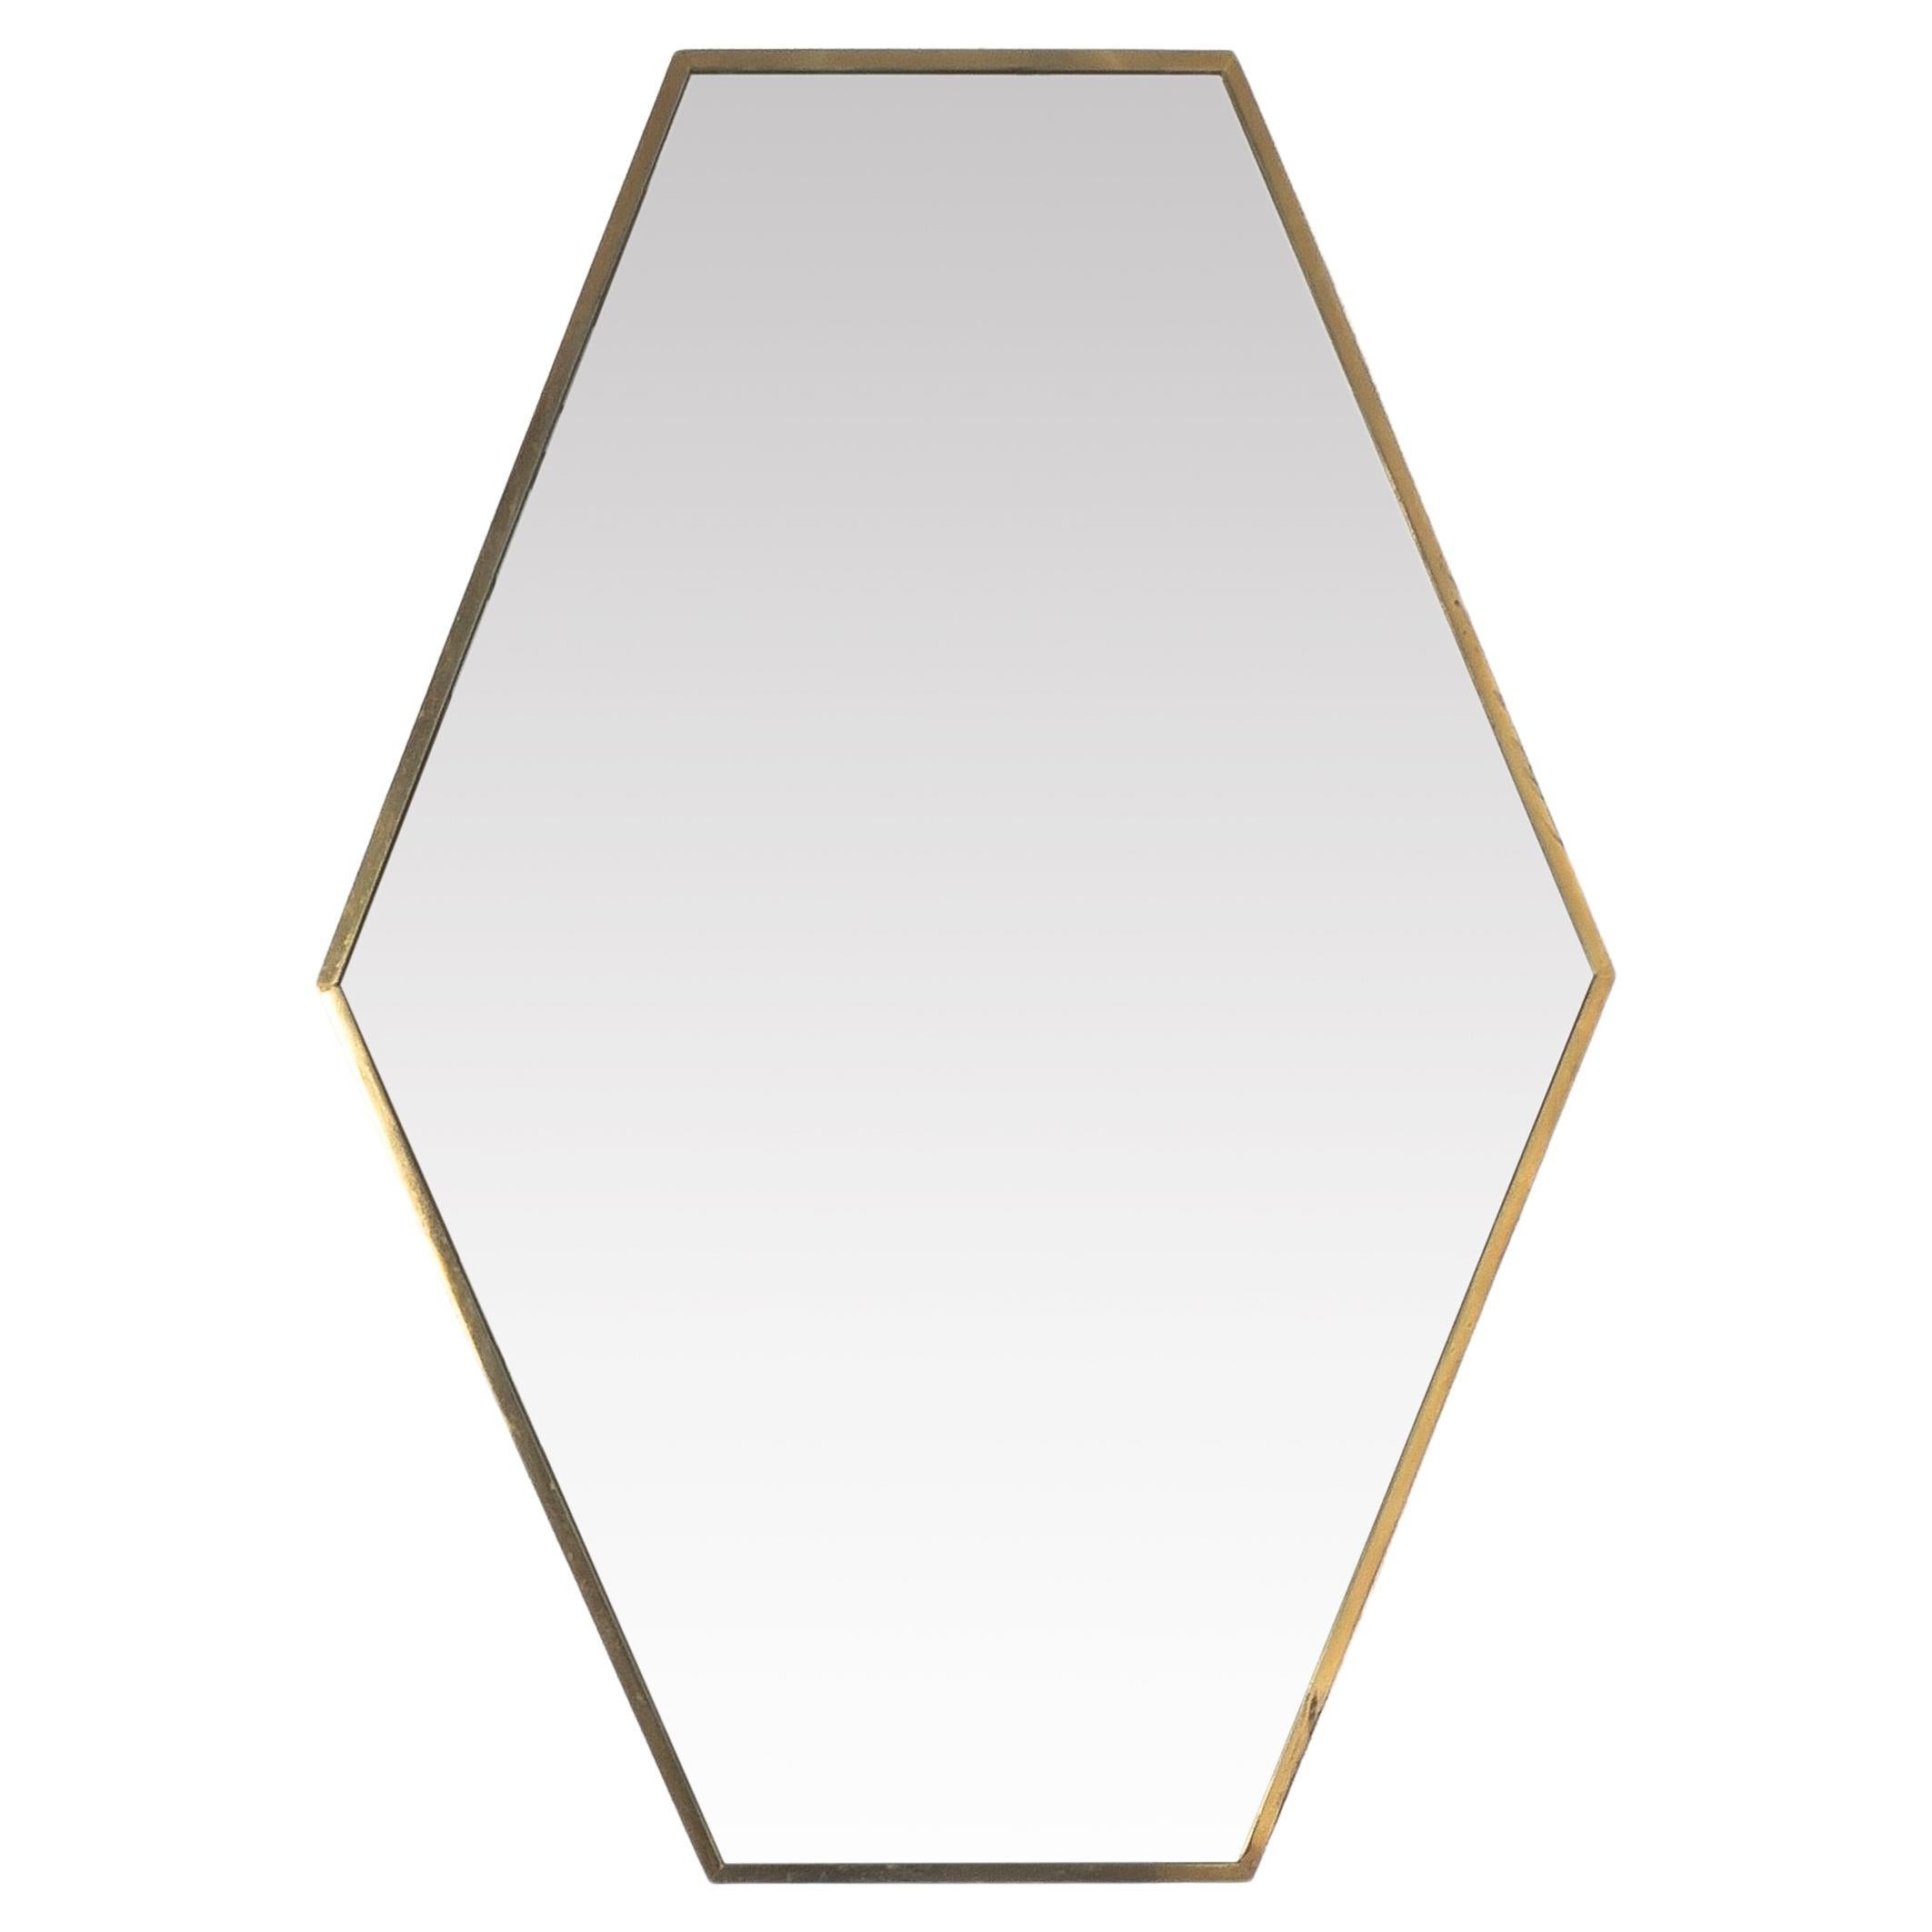 Brass Mirror Hexagonal, Midcentury, Italy In Good Condition For Sale In Vienna, AT